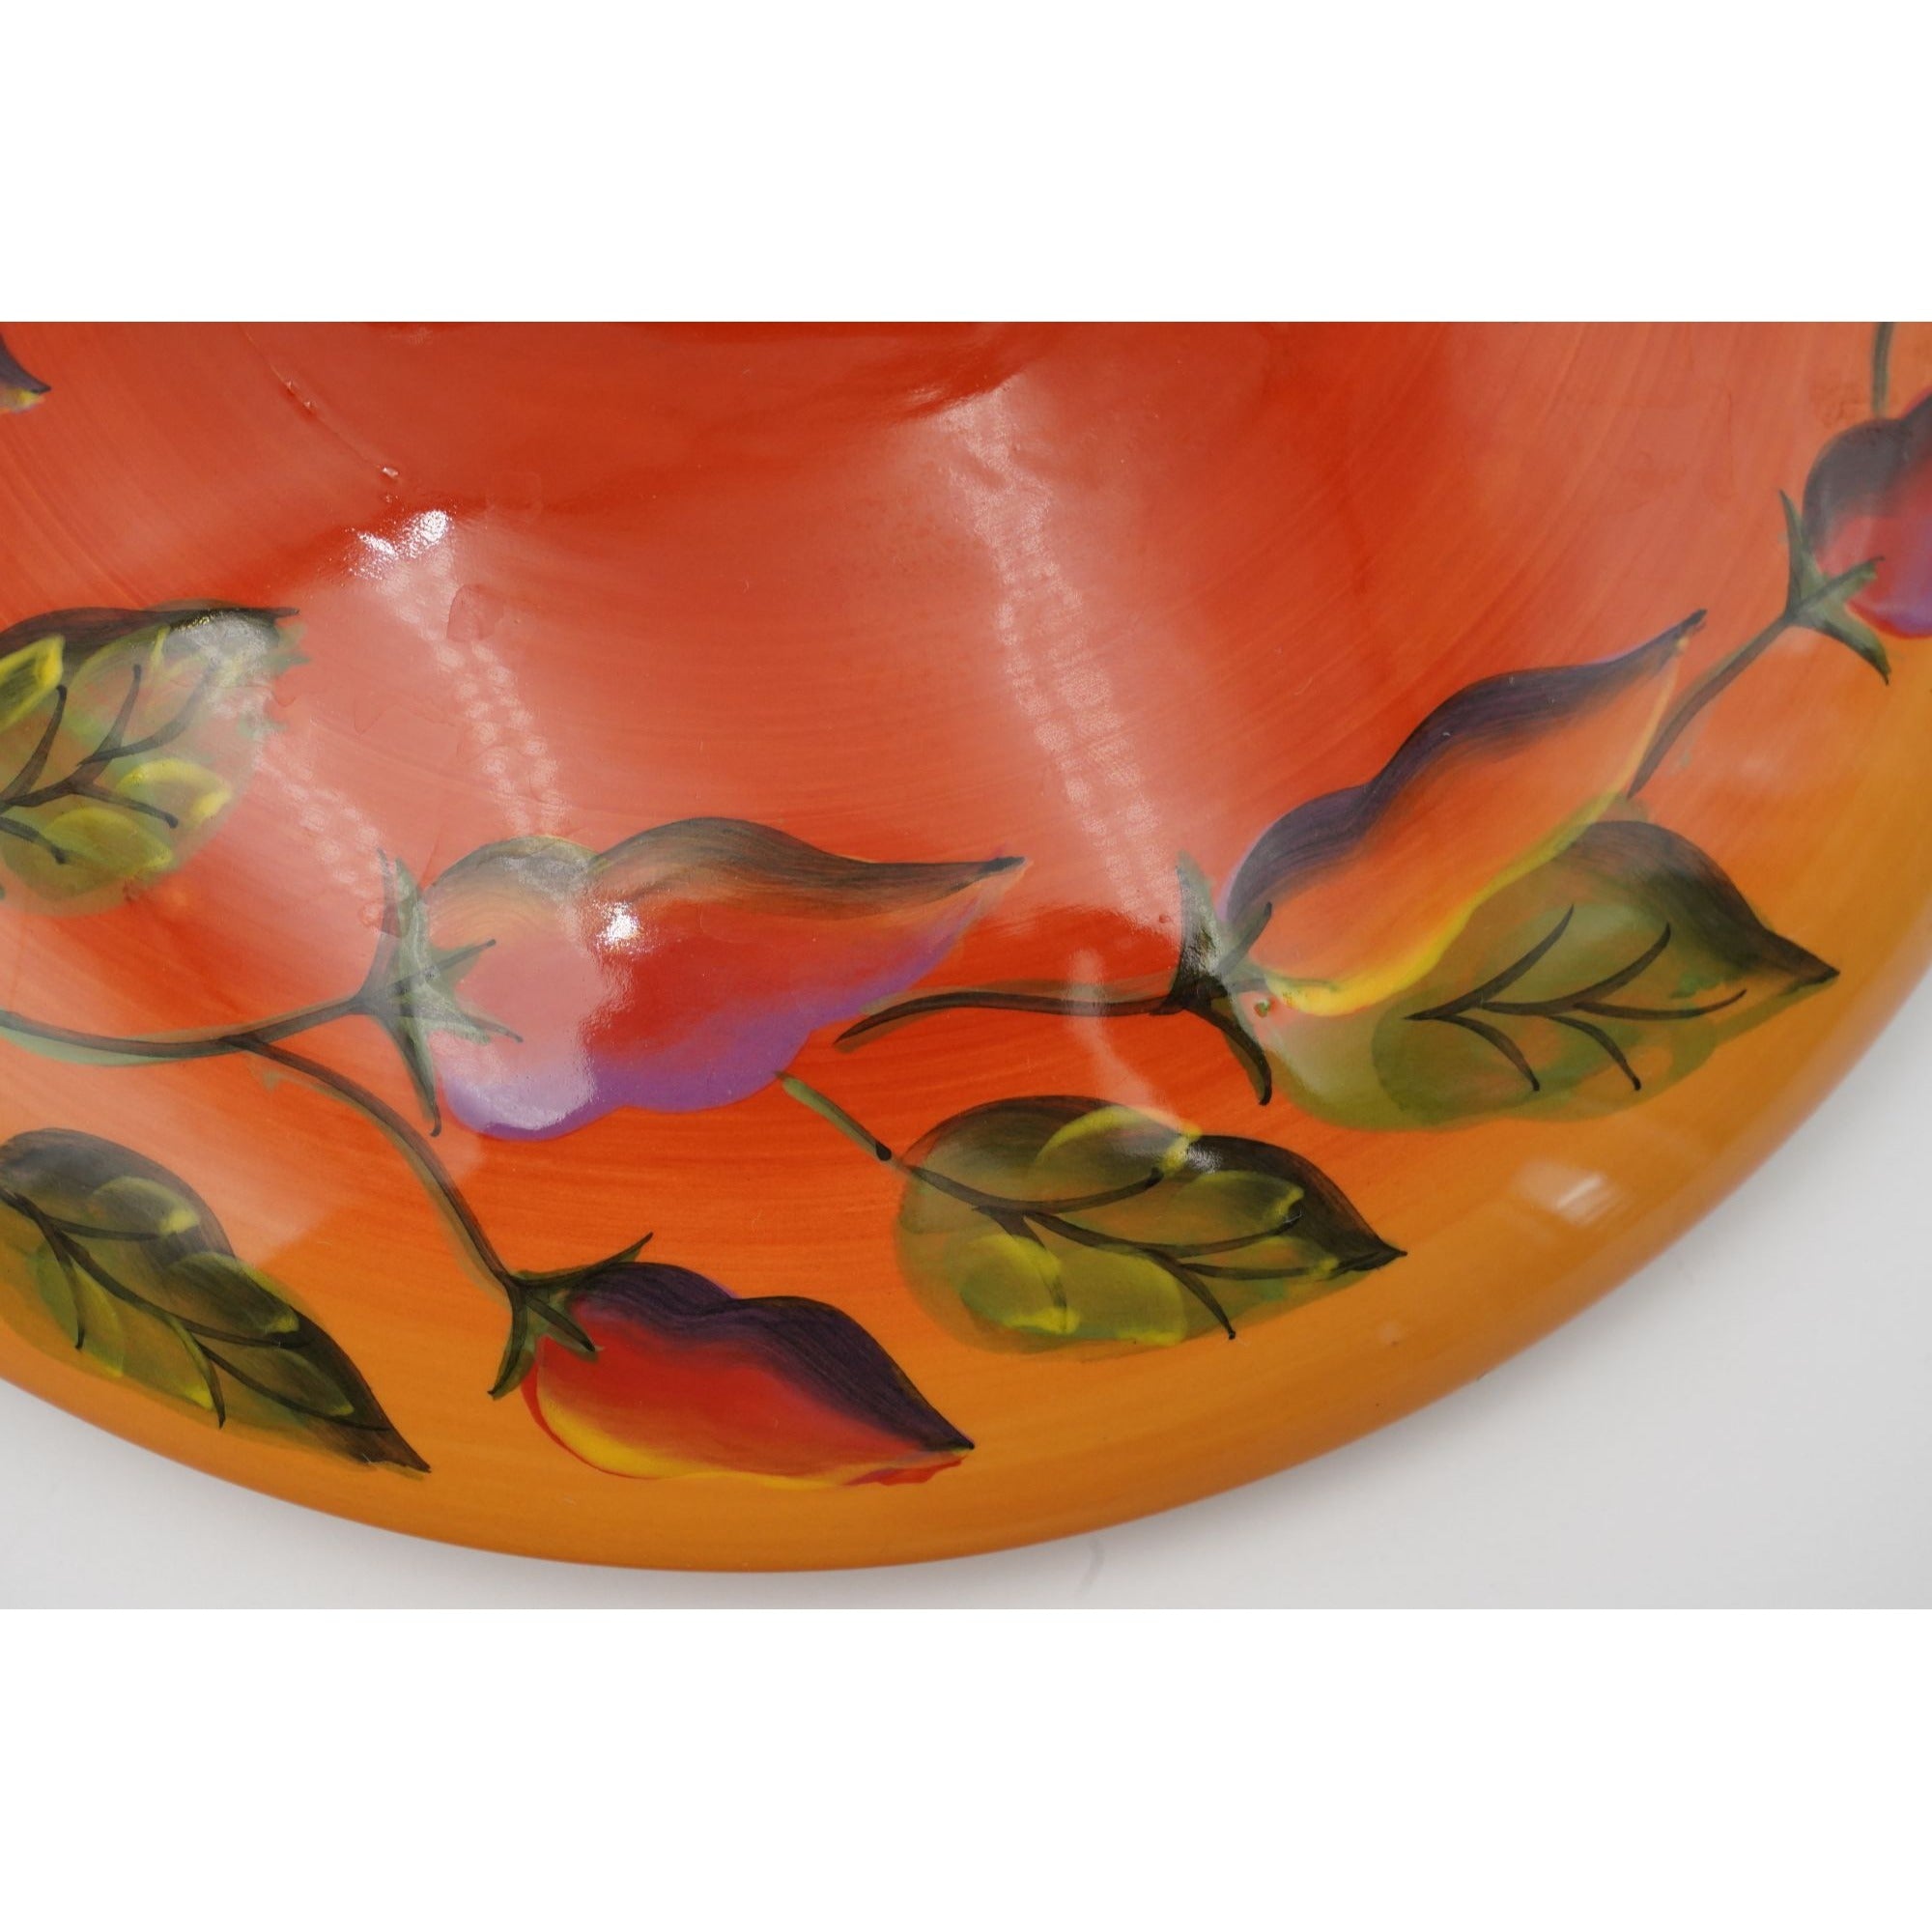 Clay Art Hand Painted Chili Fiesta Ceramic Tortilla Warmer Dish with Lid 9.75" D